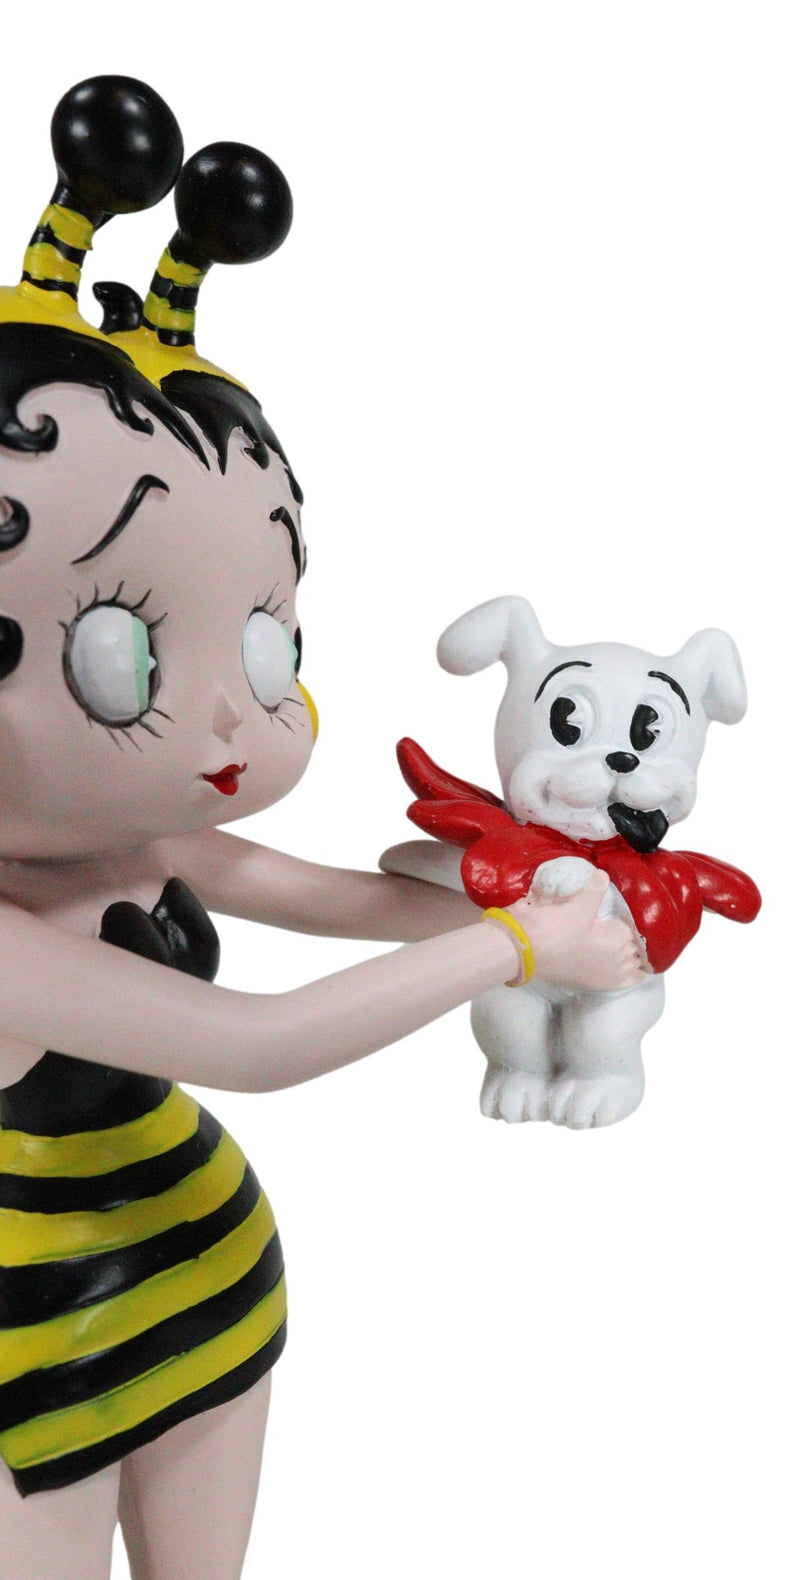 Honey Bee Bumblebee Betty Boop With Pudgy Dog Red Ribbon Novelty Figurine